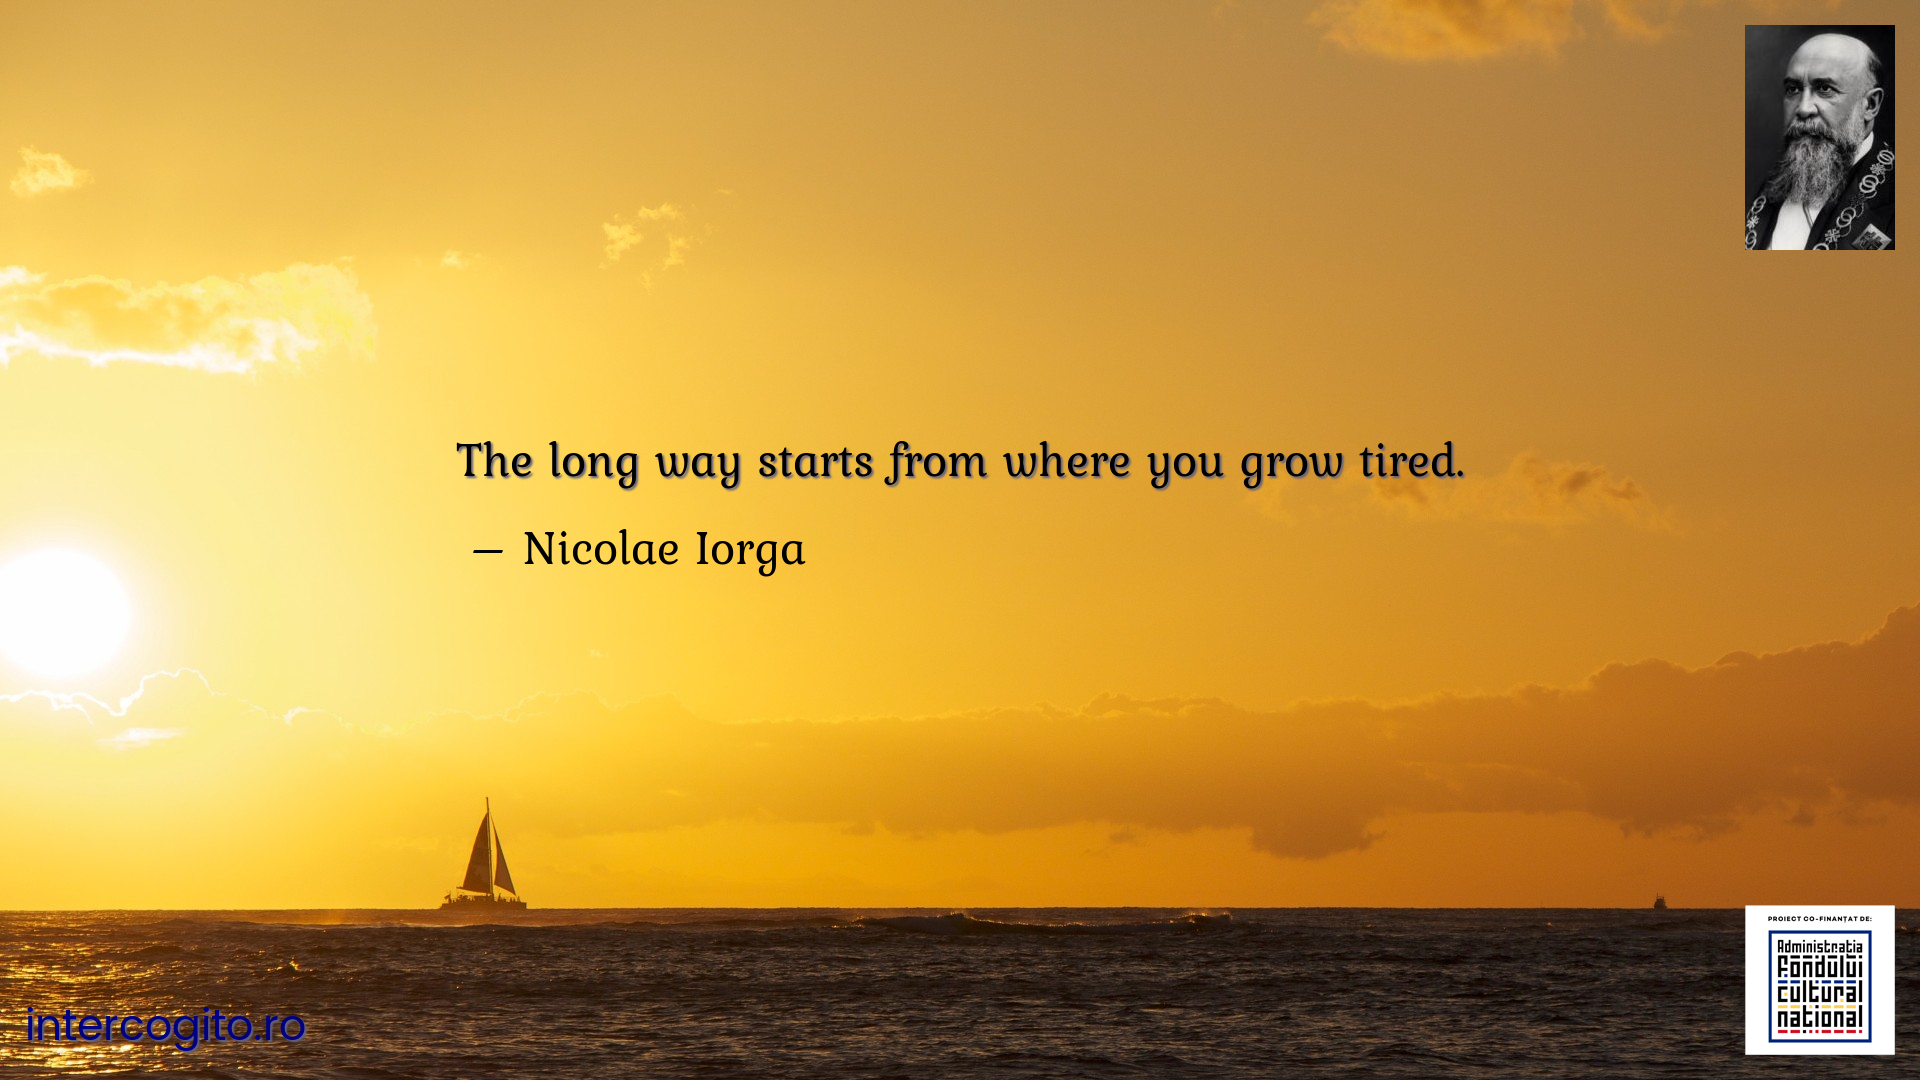 The long way starts from where you grow tired.